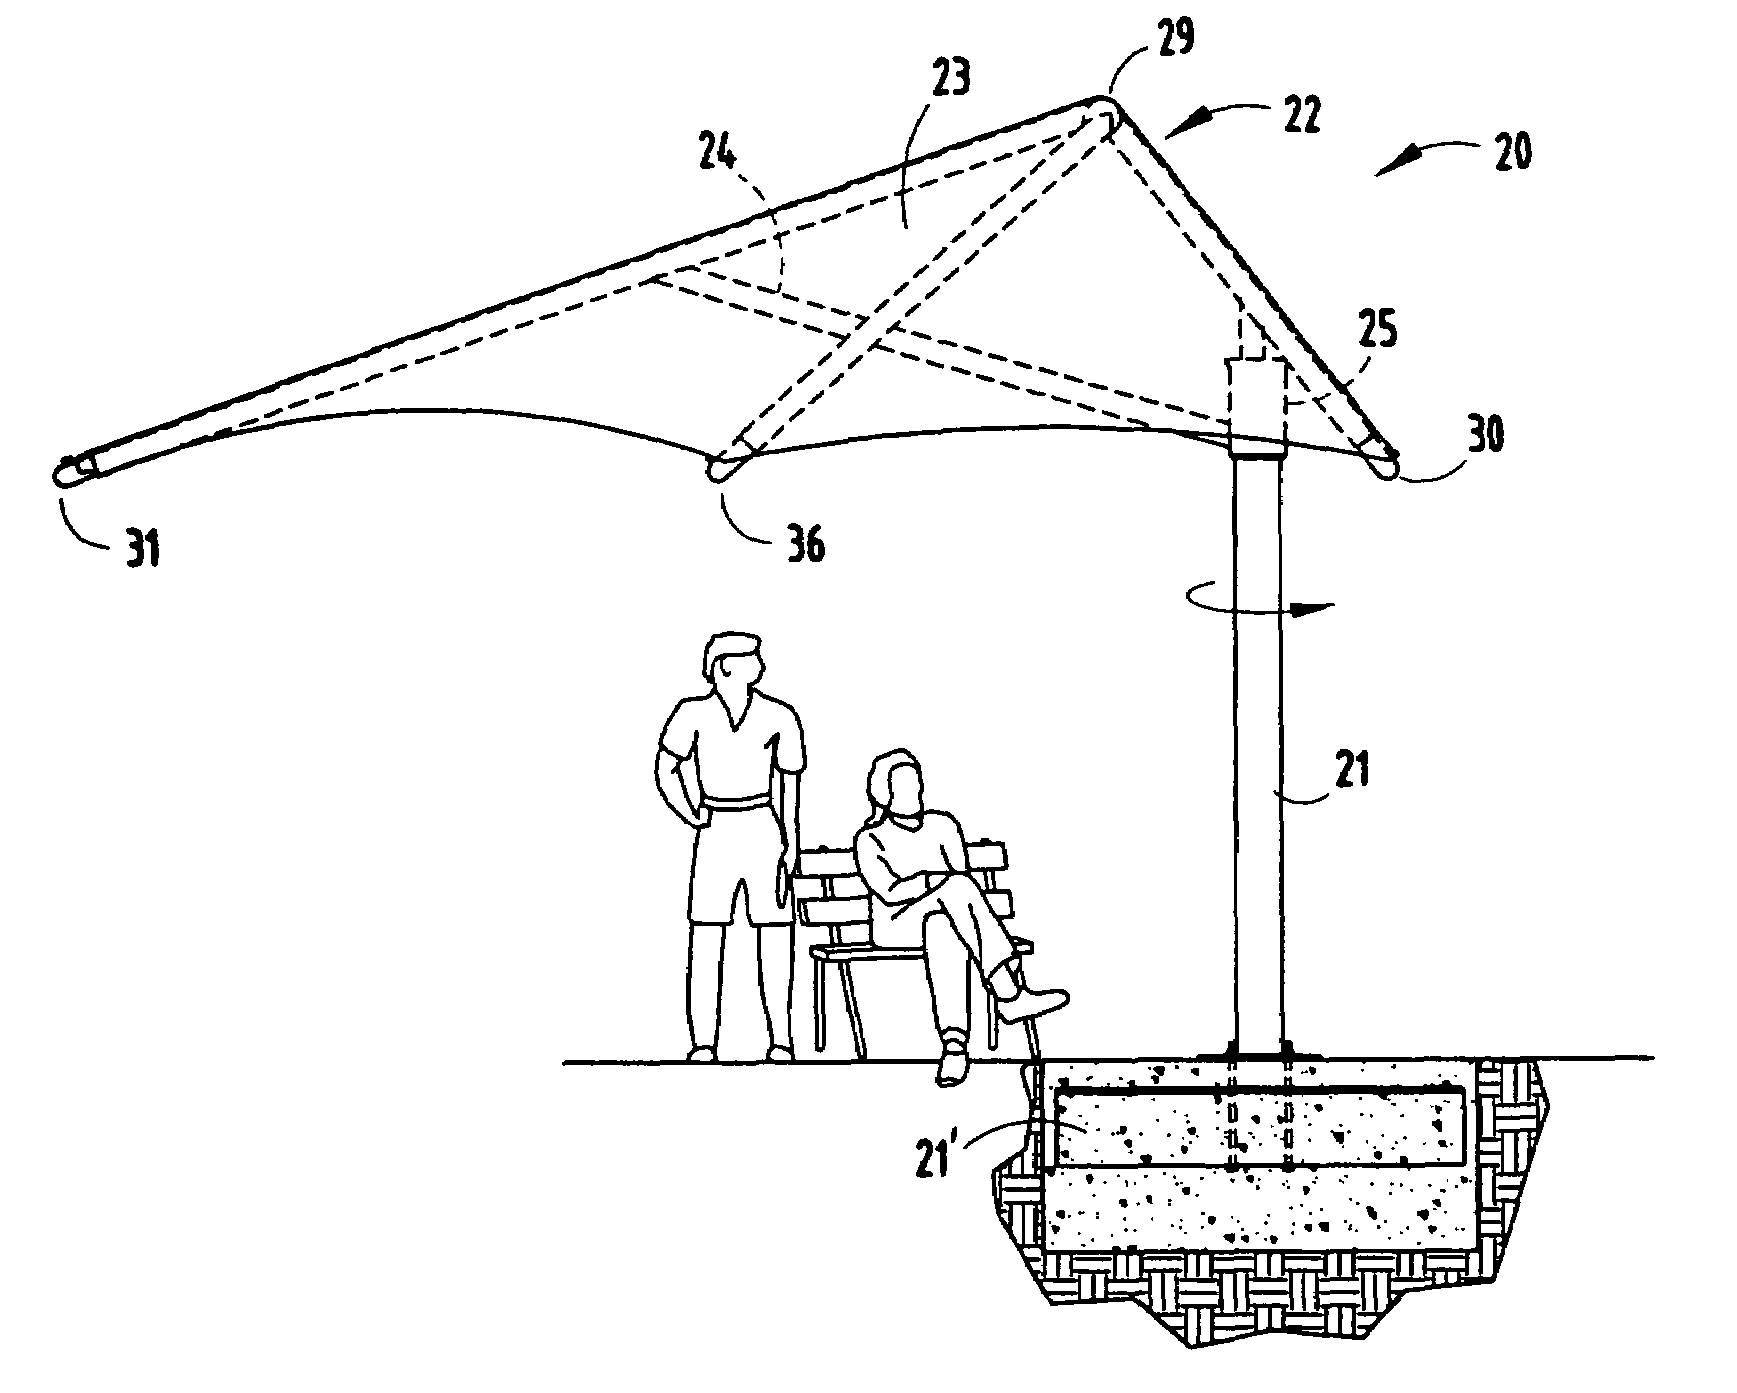 Adjustable shade-providing building structure